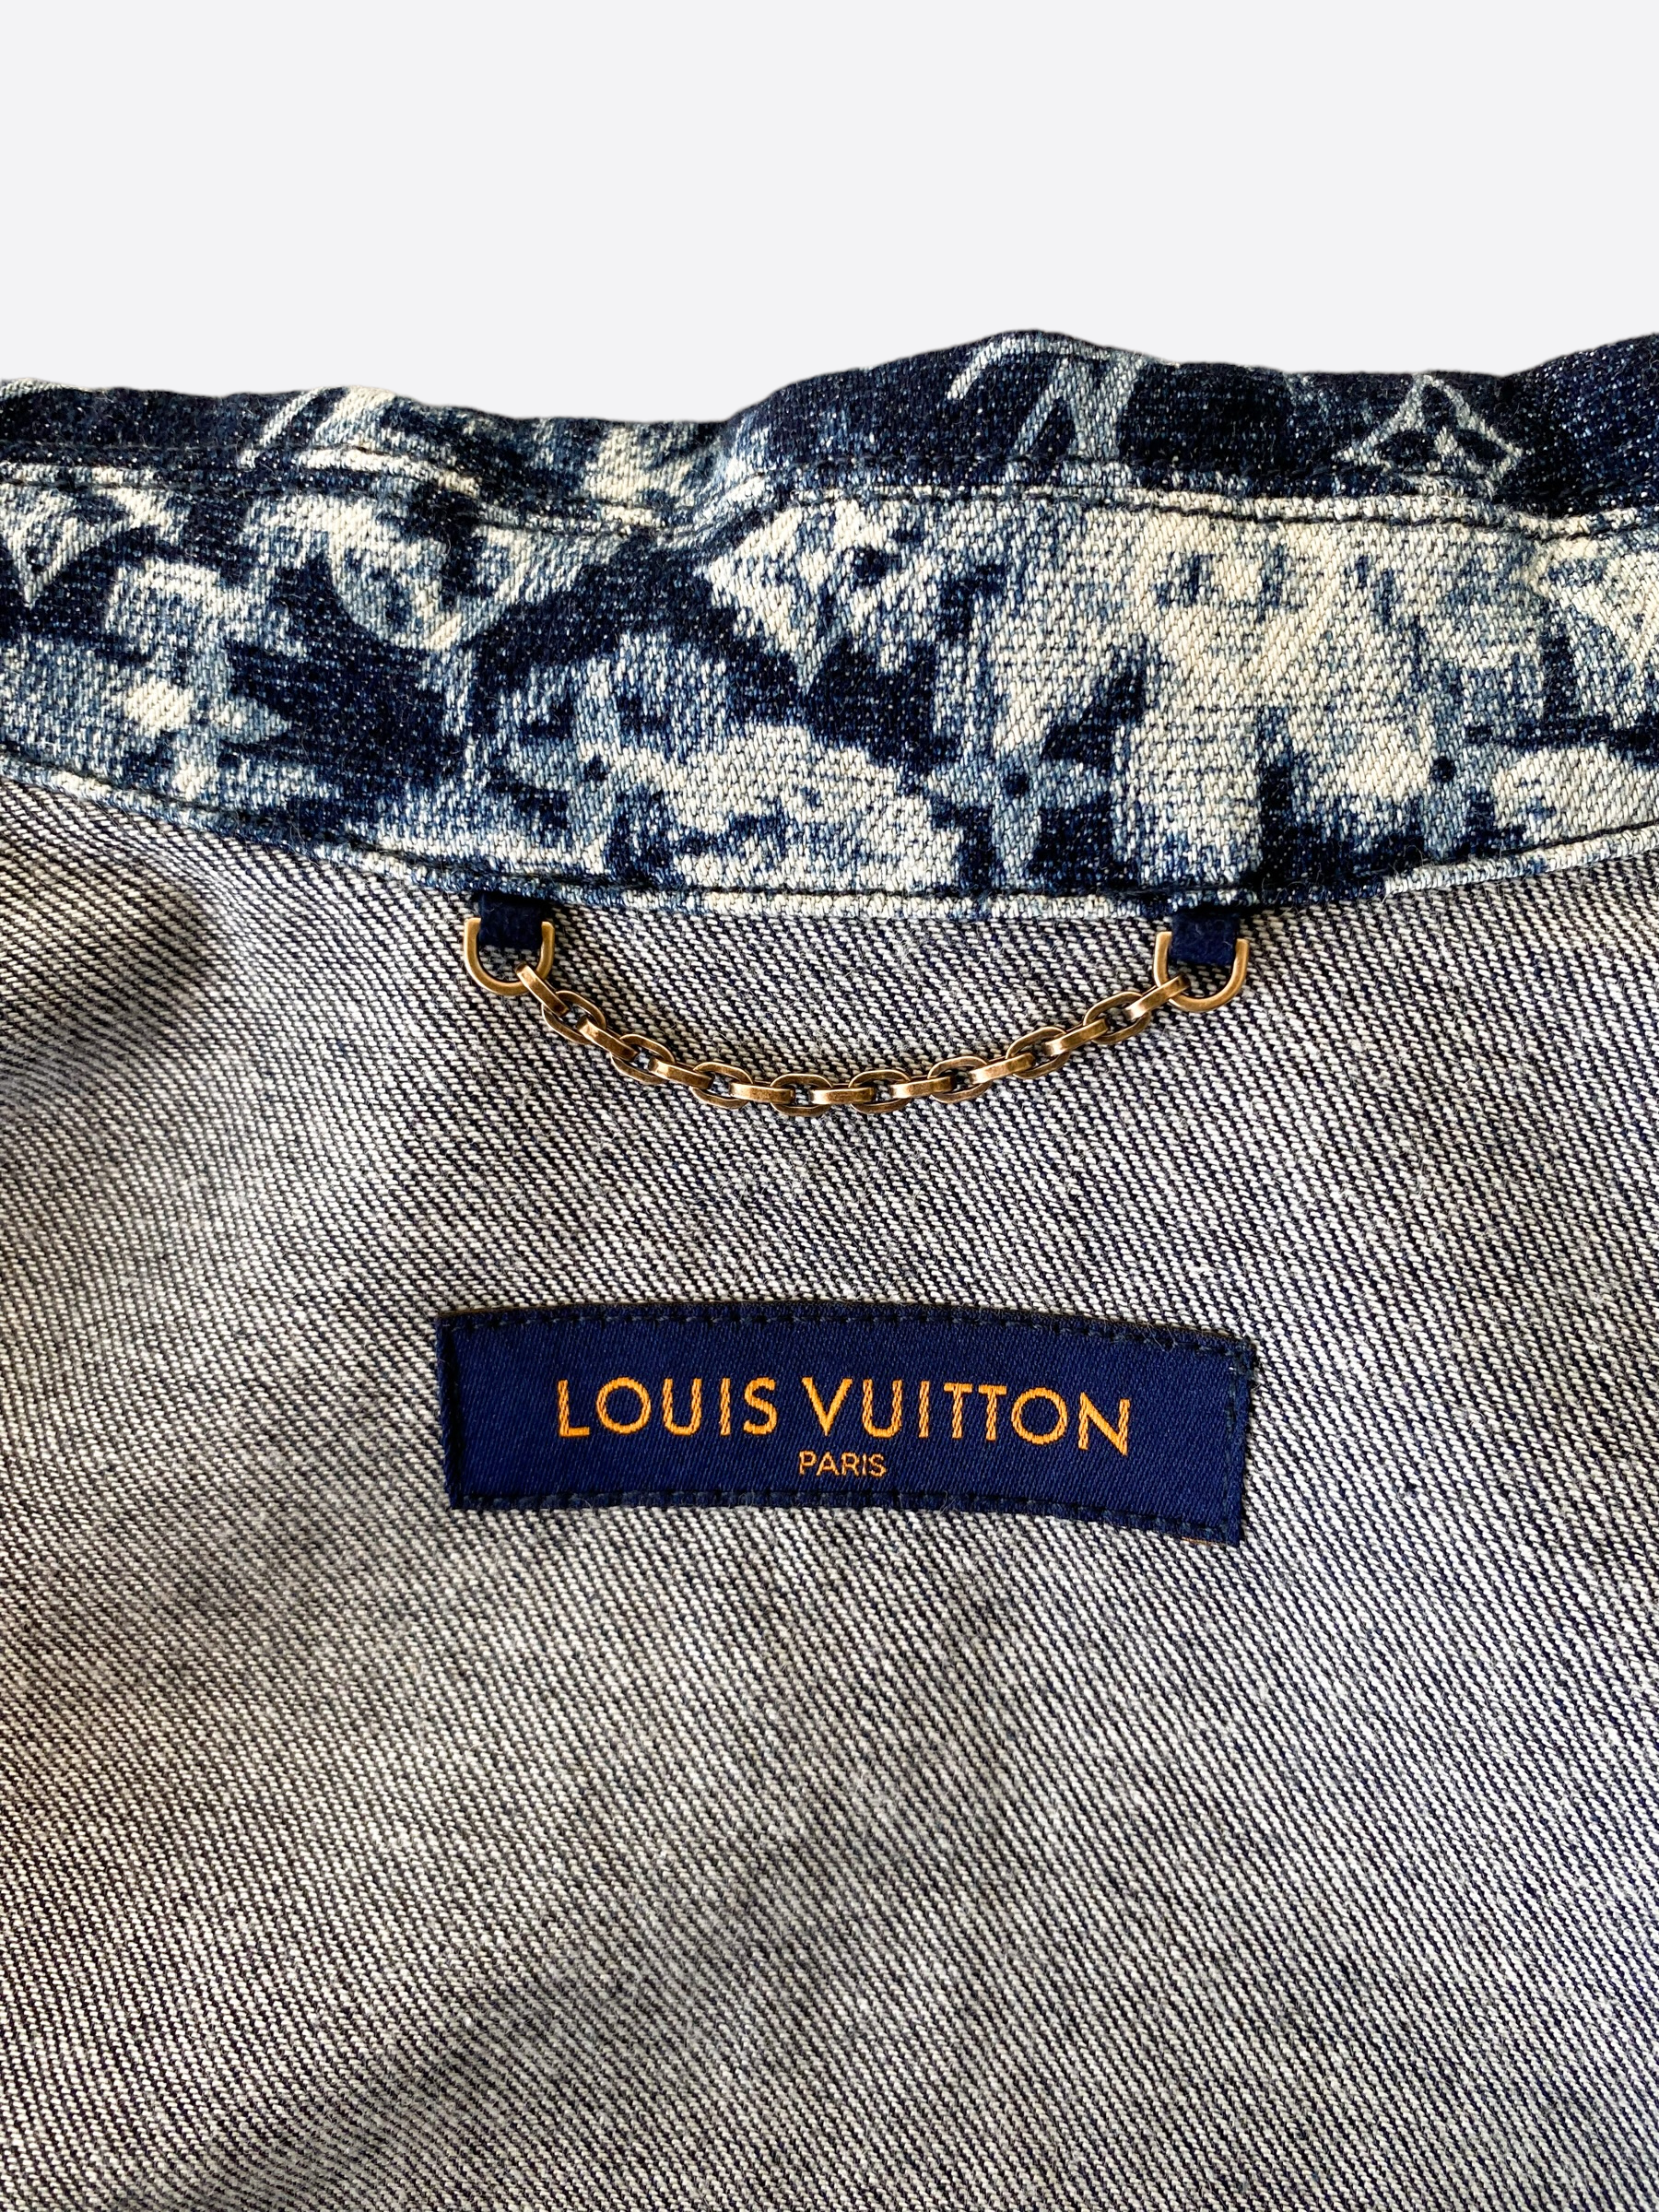 Louis Vuitton Tapestry Shirt Online, SAVE 47% 